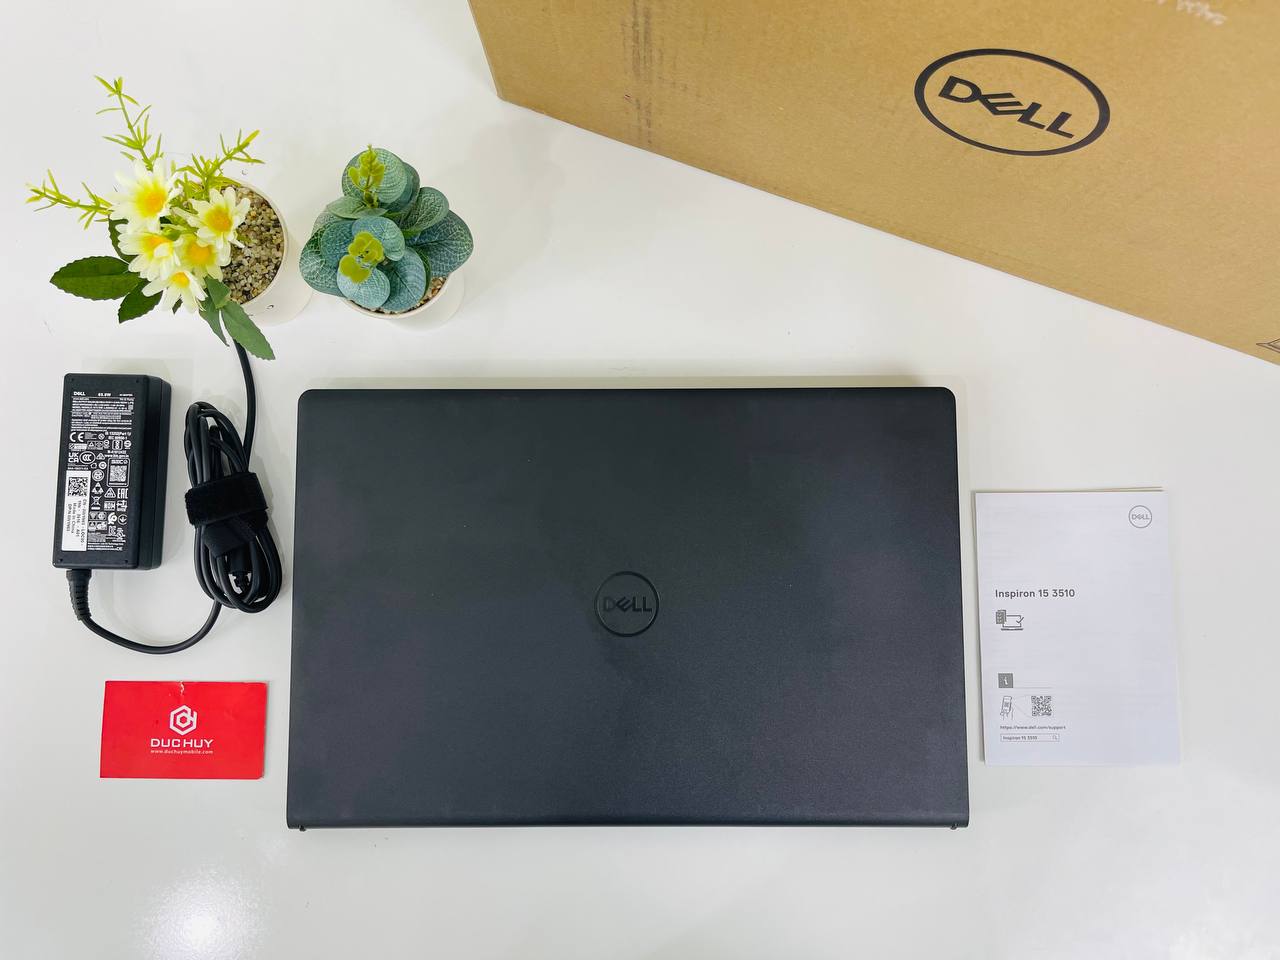 thiết kế Dell Inspiron N3510